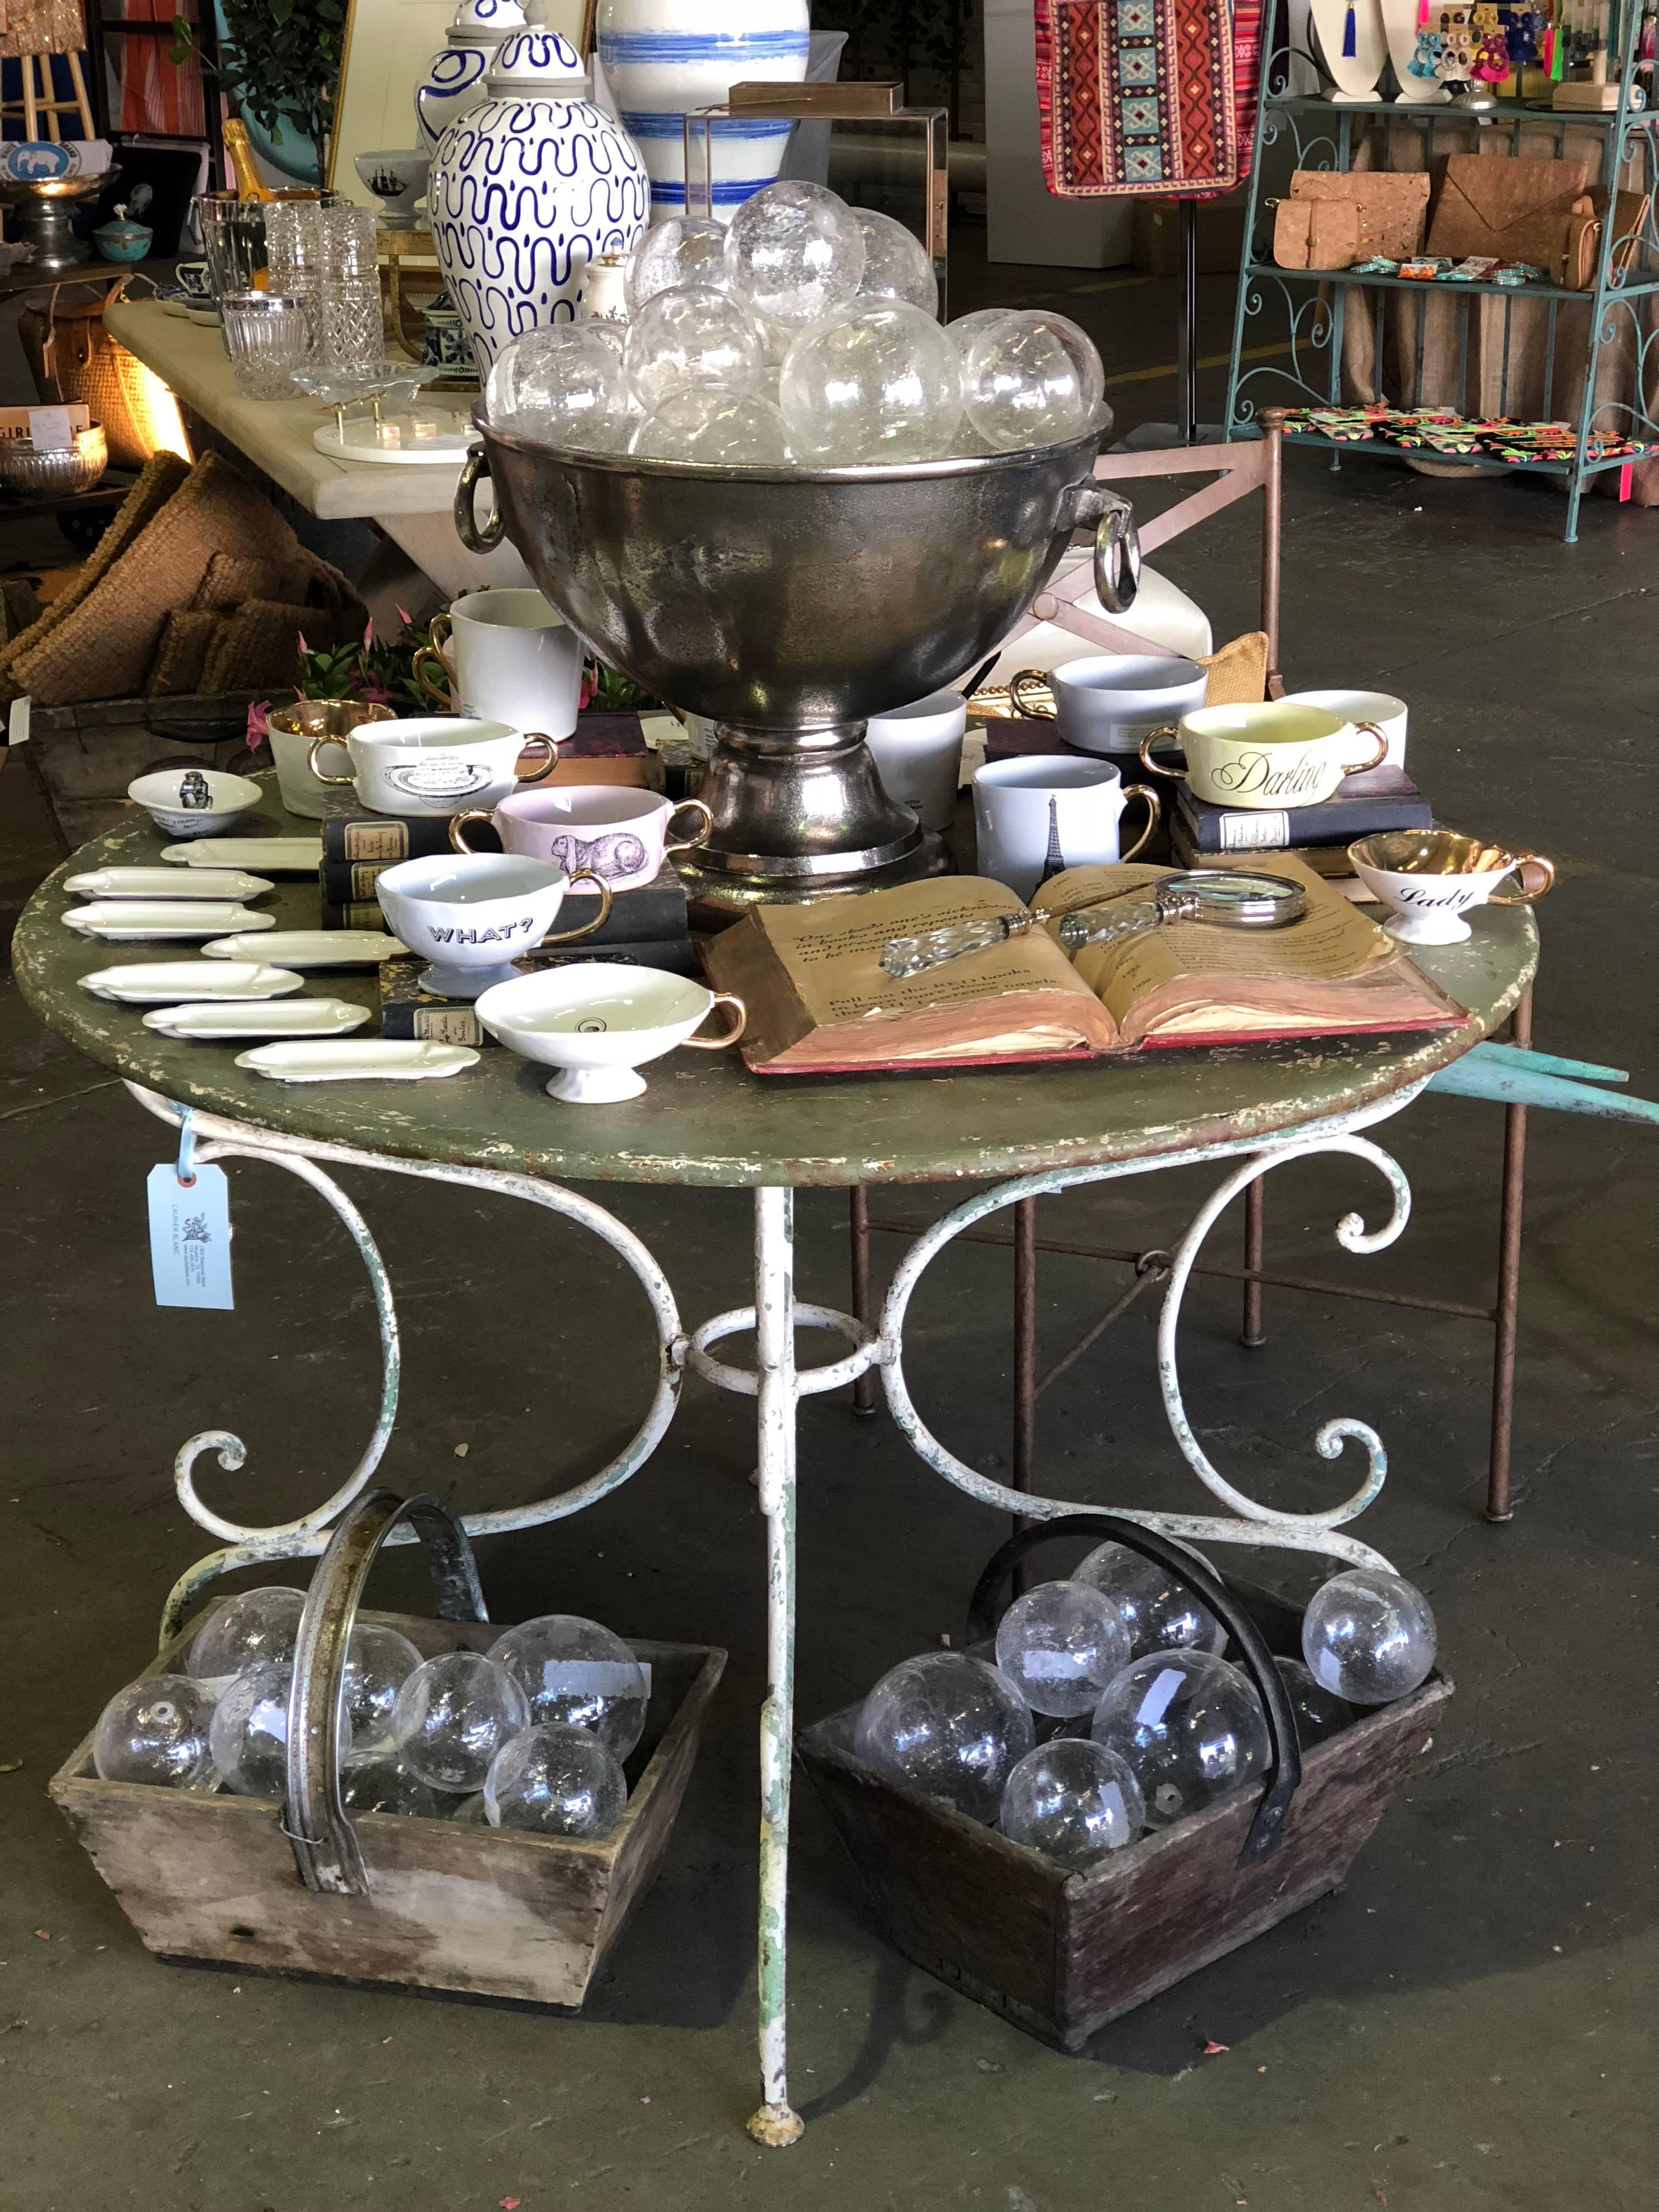 1930s Rustic Metal Garden Table Found in France 4